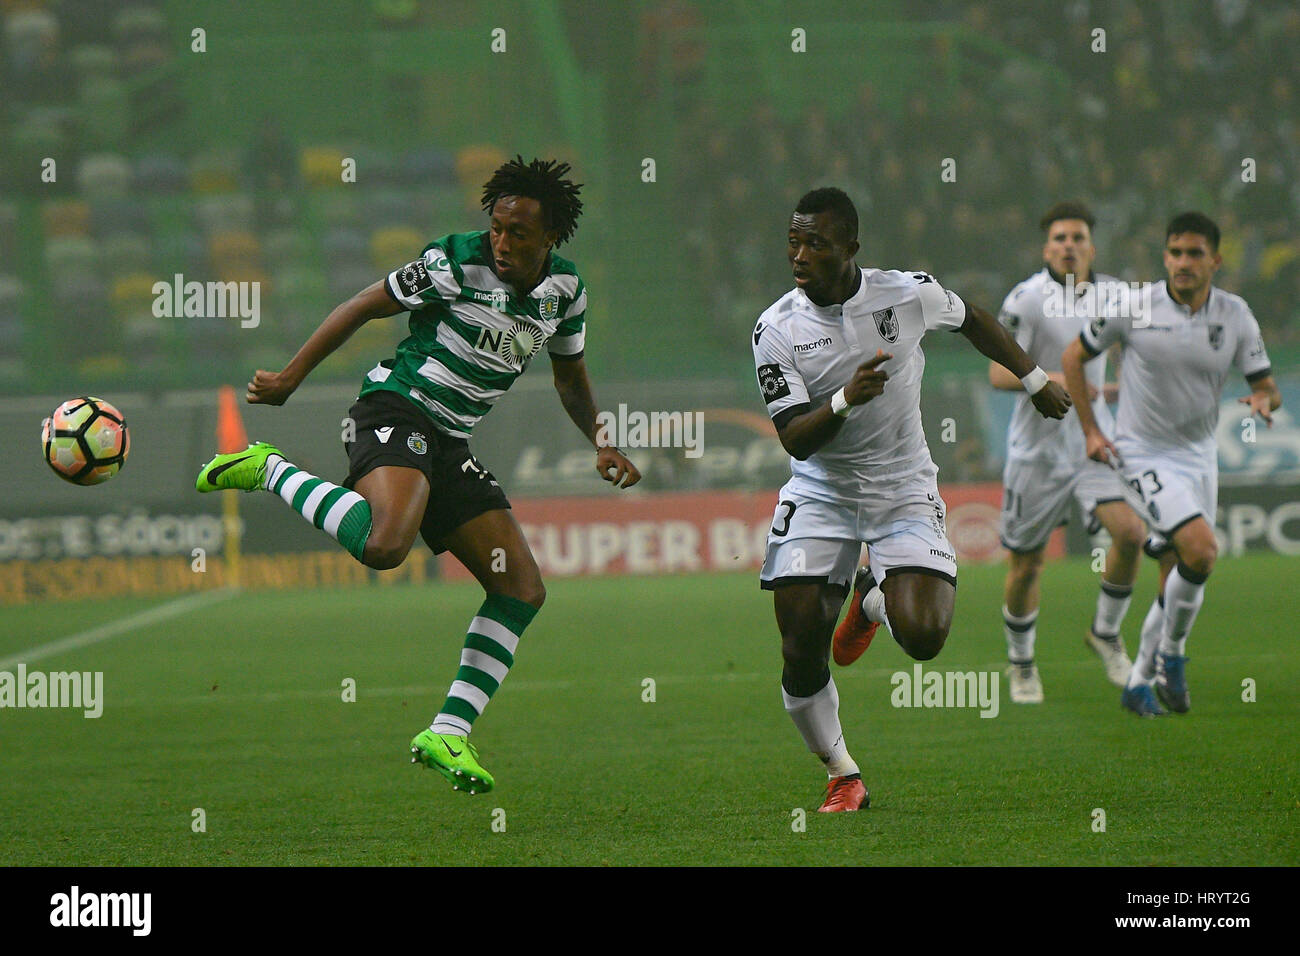 Portugal, Lisbon, Mar. 05, 2017 - FOOTBALL - Gelson Martins (L), Sporting player, in action during match between Sporting Clube de Portugal and Vitória Guimarães for Portuguese Football League match at Estádio Alvalade XXI, in Lisbon, Portugal. Credit: Bruno de Carvalho/Alamy Live News Stock Photo